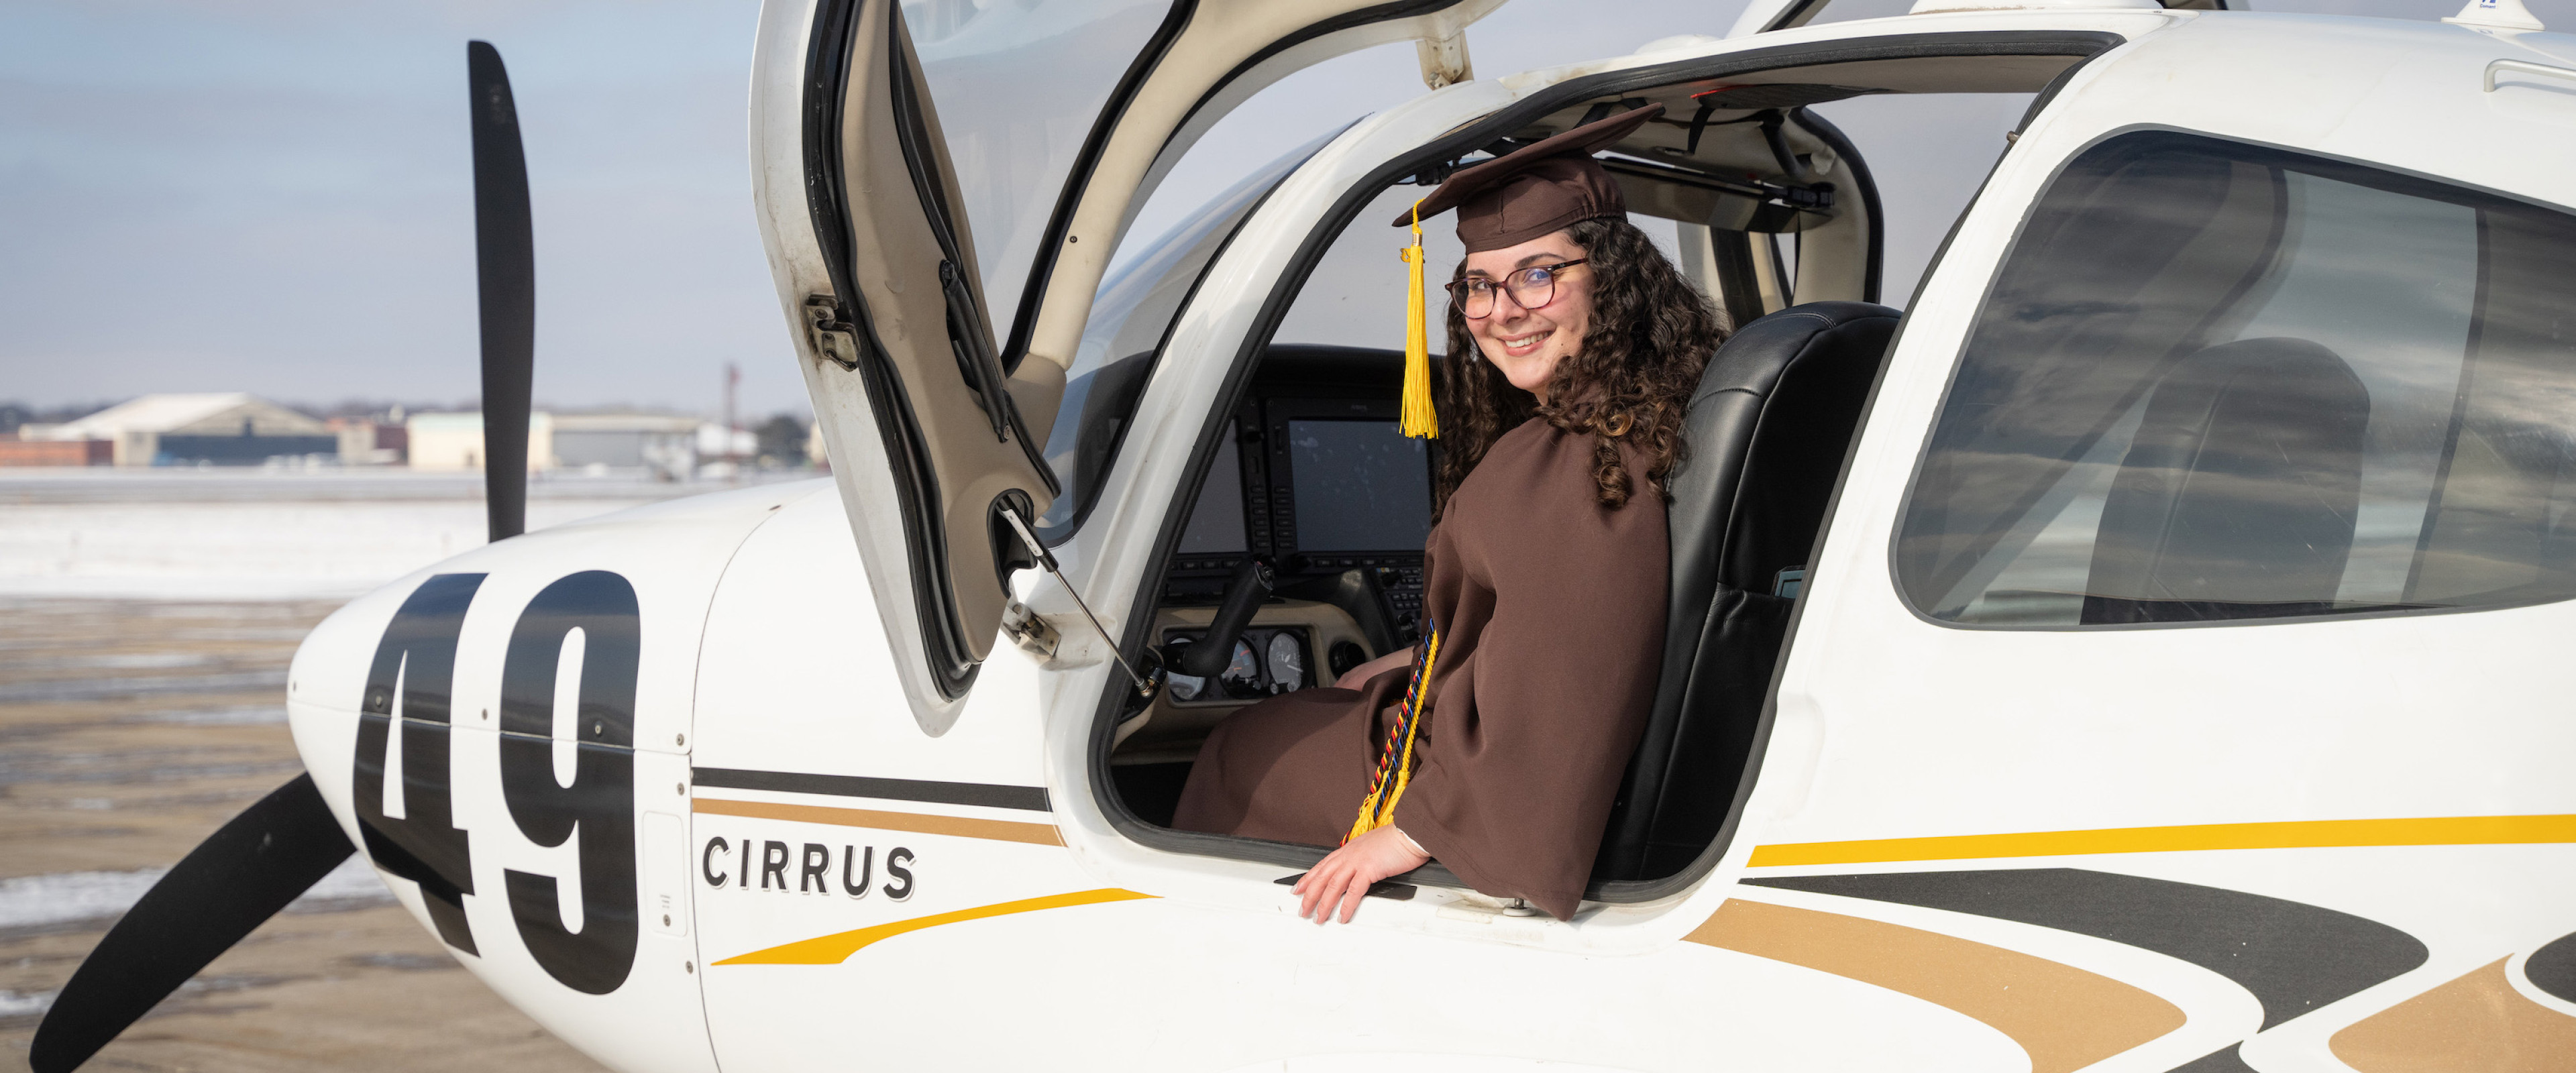 Emily Hartzell sits in the cockpit of a small airplane wearing her graduation regalia.